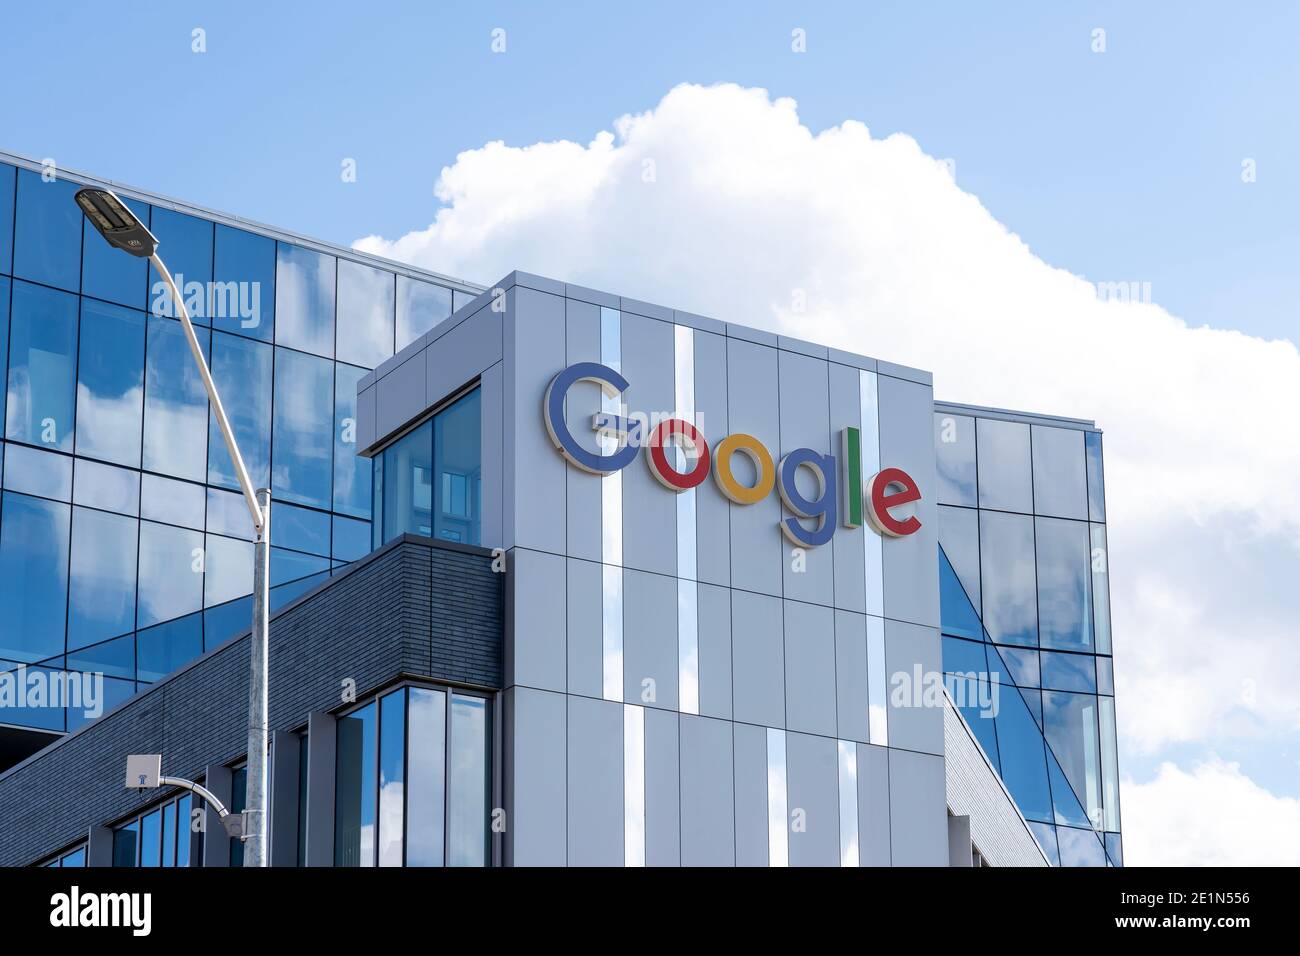 Kitchener-Waterloo, On, Canada - October 17, 2020: Google sign is seen on the office building in Kitchener-Waterloo, Ontario, Canada Stock Photo